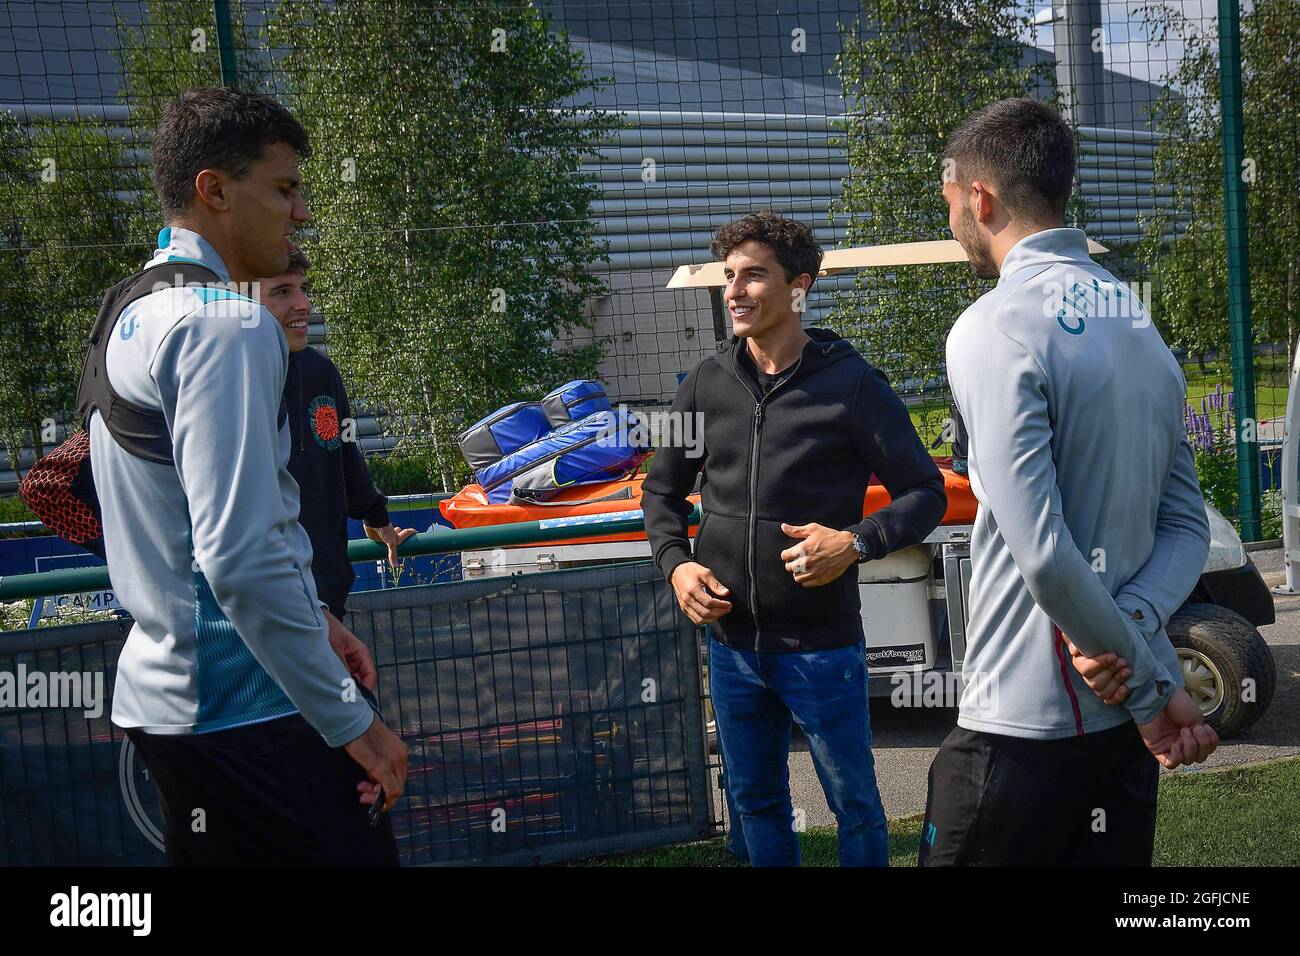 Spielberg, Austria. 25th Aug, 2021. Marc Marquez and Alex Marquez visit Manchester City Football Club ahead of the British GP. Manchester. August 25, 2021 In picture: Marc Marquez and Alex Marquez with Rodri and Ferran Torres Marc Marquez y Alex Marquez visitan los campos de entrenamiento del Manchester City antes del Gran Premio de Inglaterra de MotoGP, Manchester 25 de Agosto de 2021 POOL/ MotoGP.com/Cordon Press Images will be for editorial use only. Mandatory credit: © MotoGP.com Credit: CORDON PRESS/Alamy Live News Stock Photo